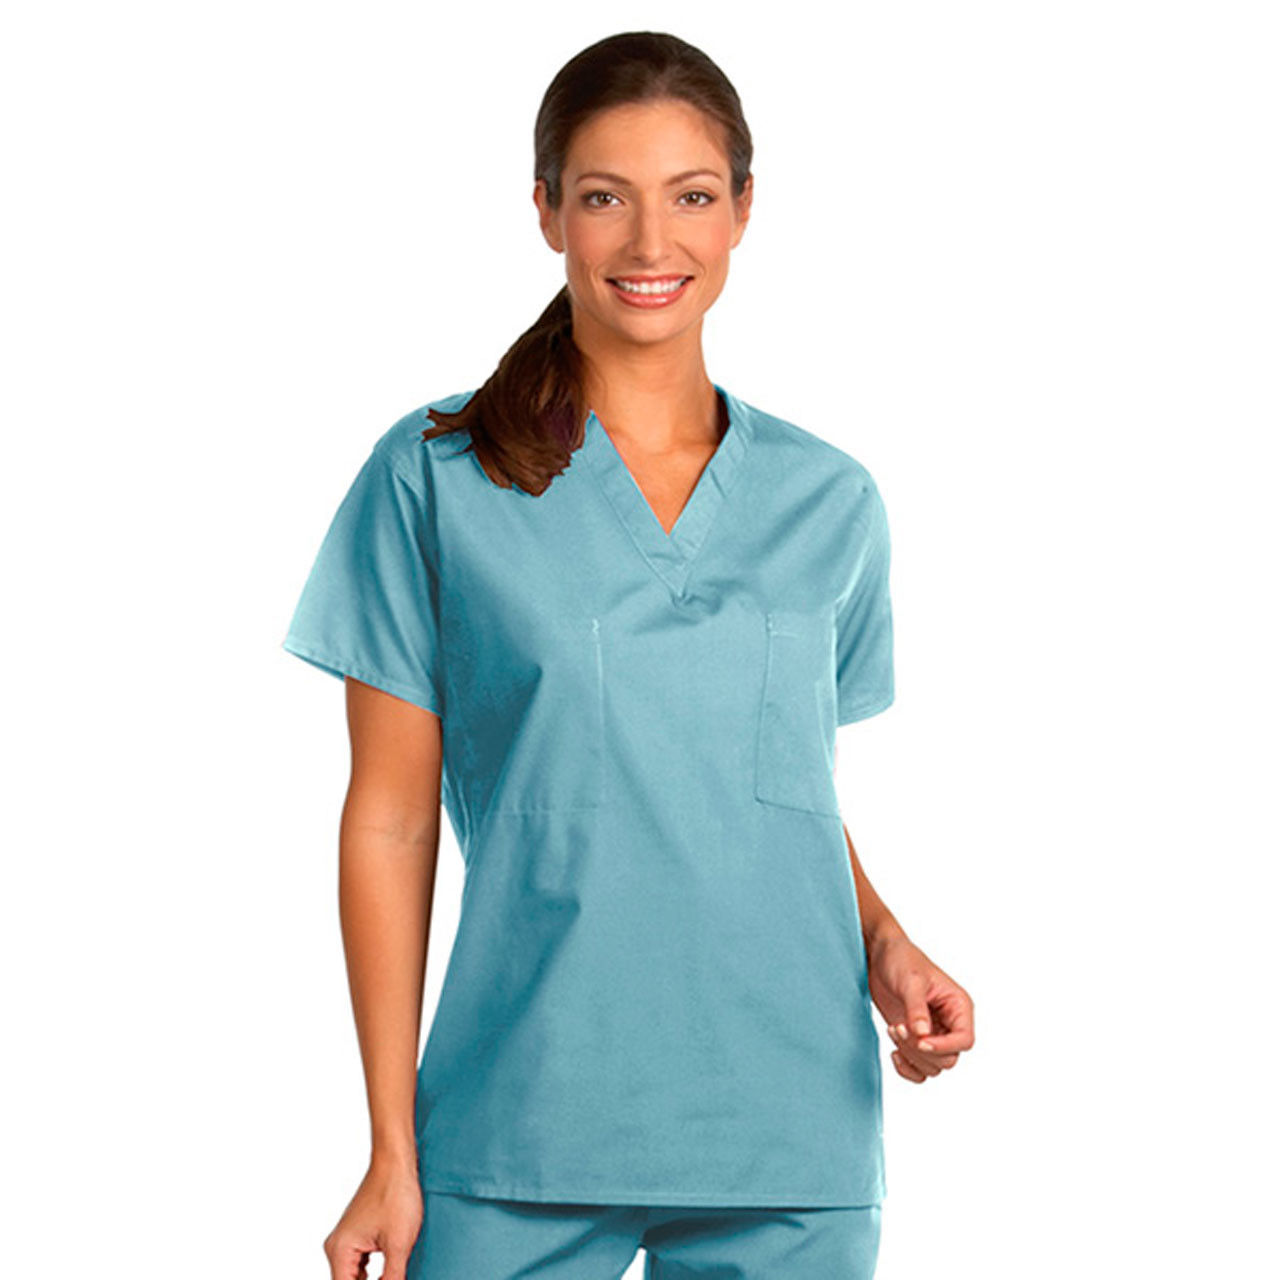 What material is used in the making of these unisex surgical scrubs sets?